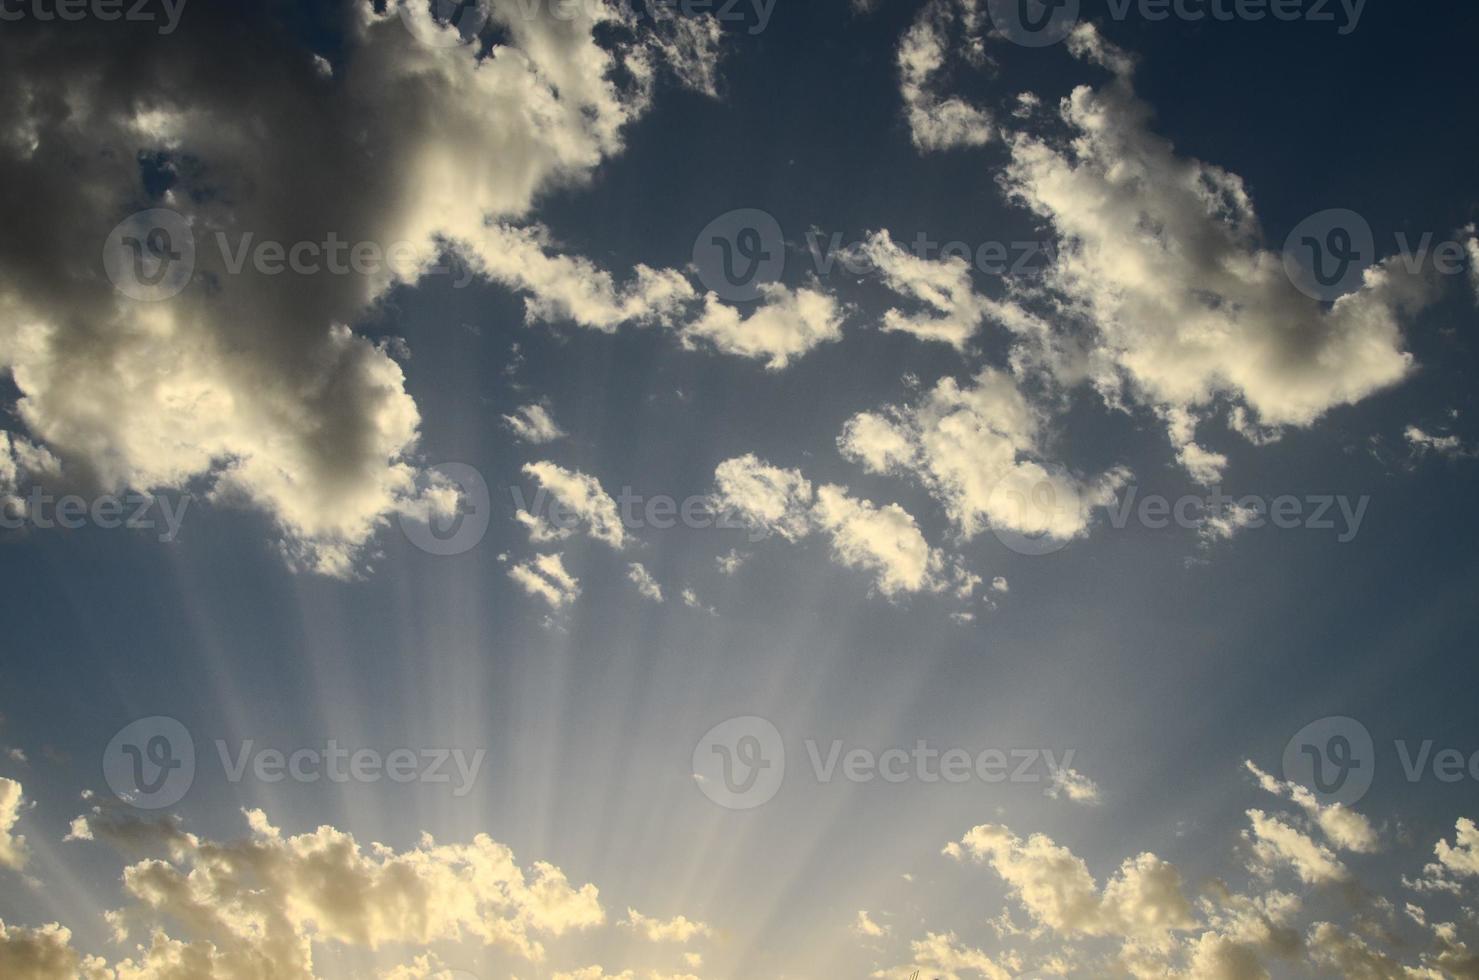 Cloudy sky view photo